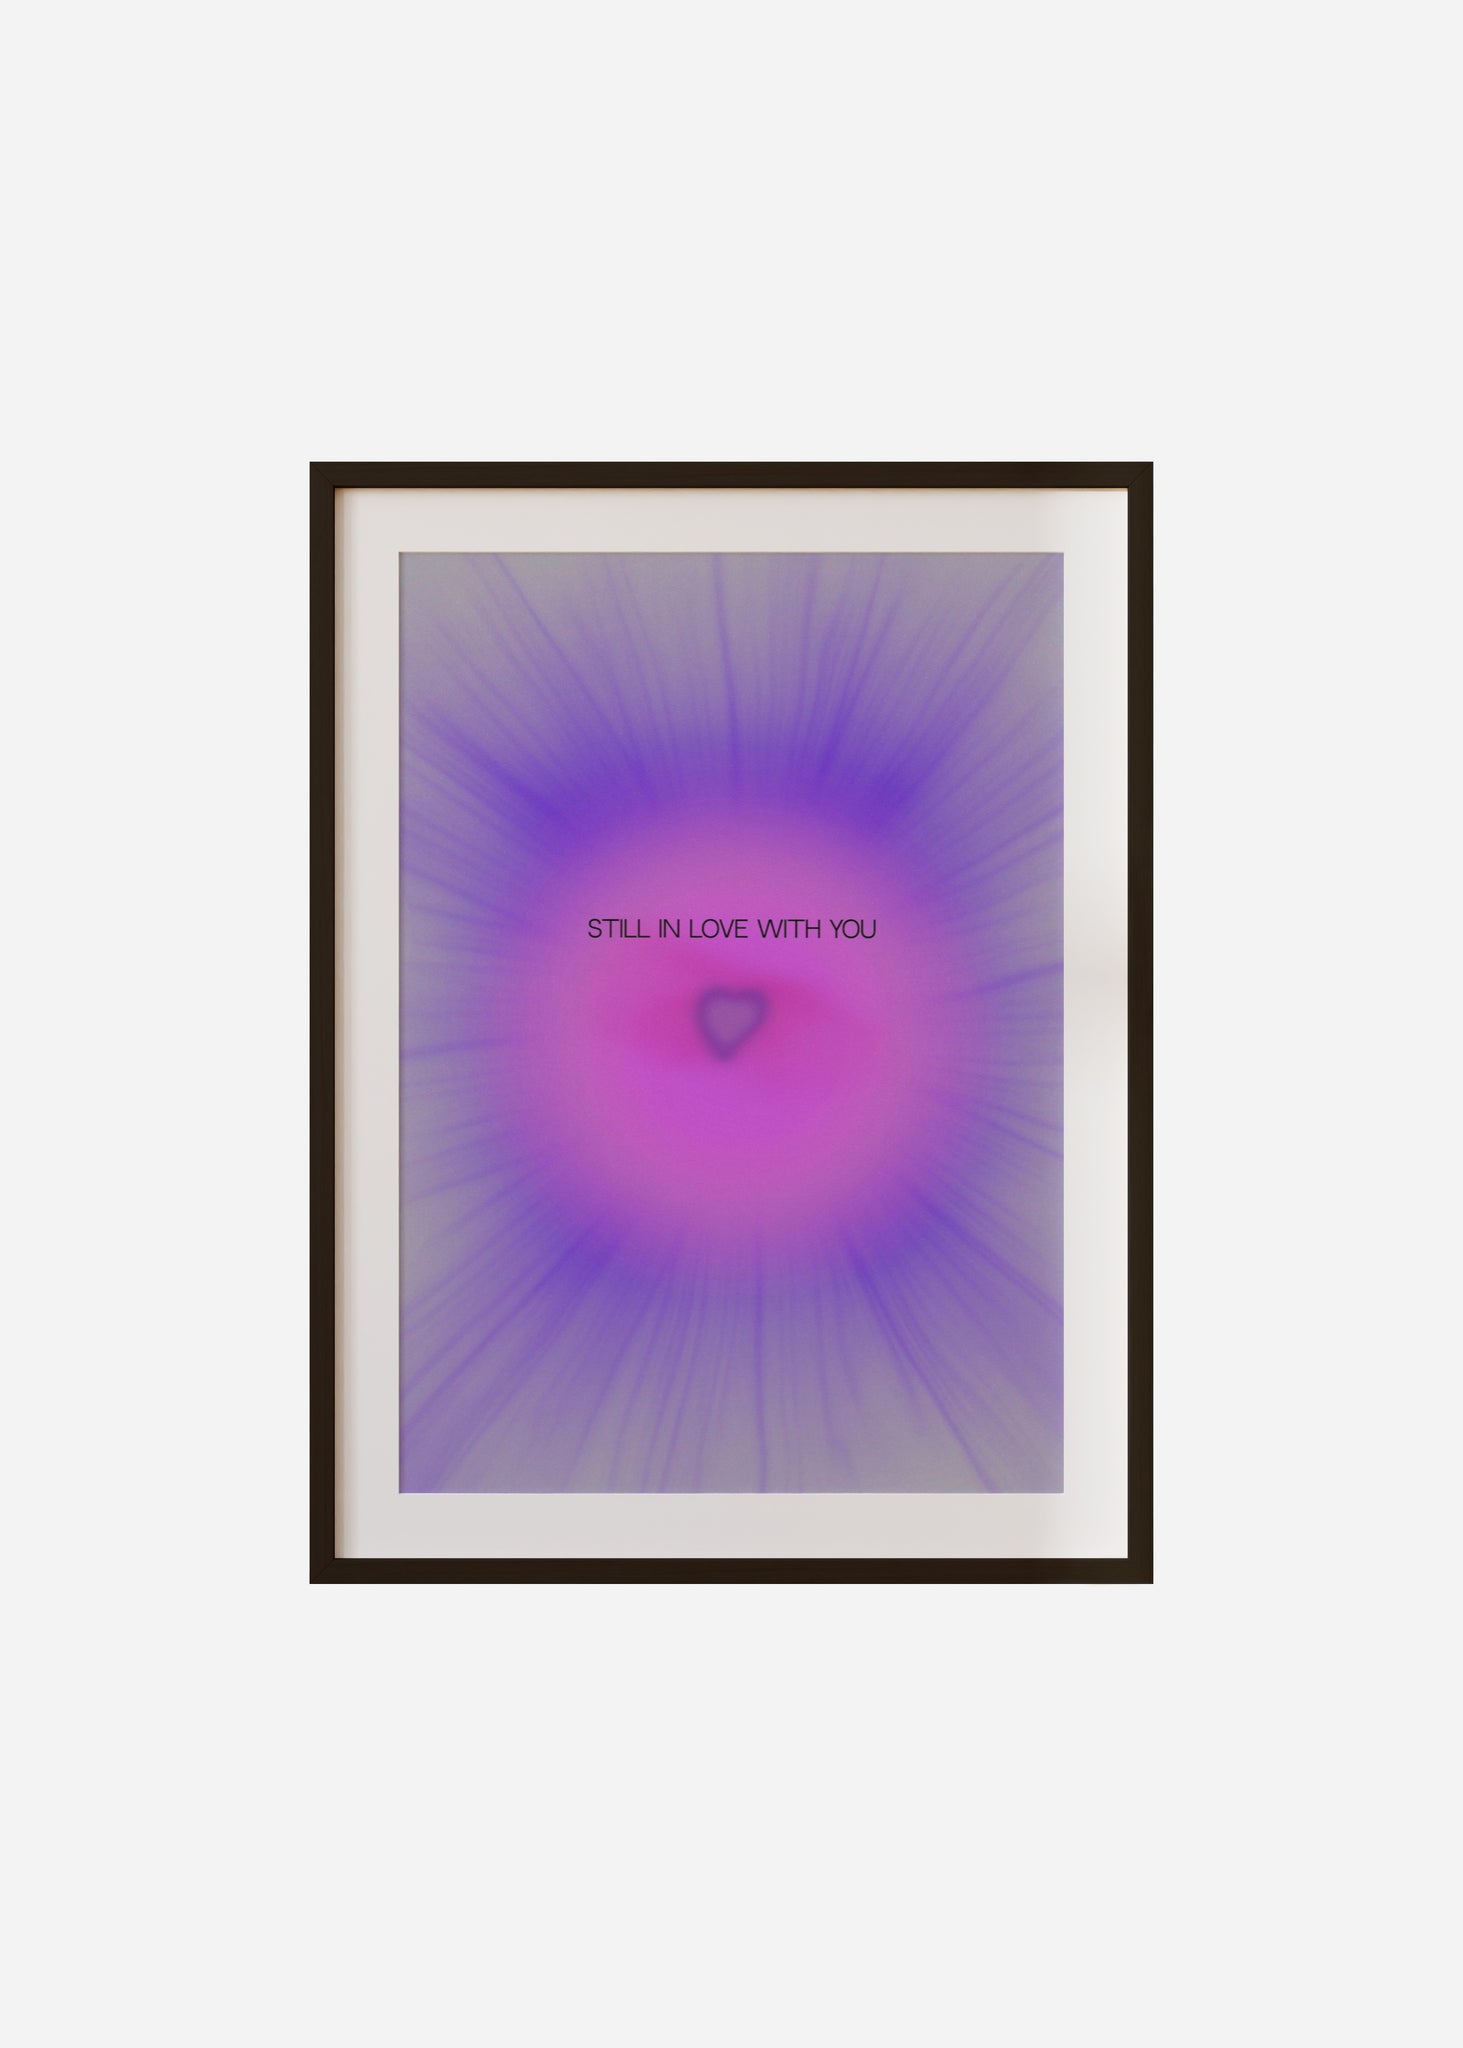 still in love with you Framed & Mounted Print